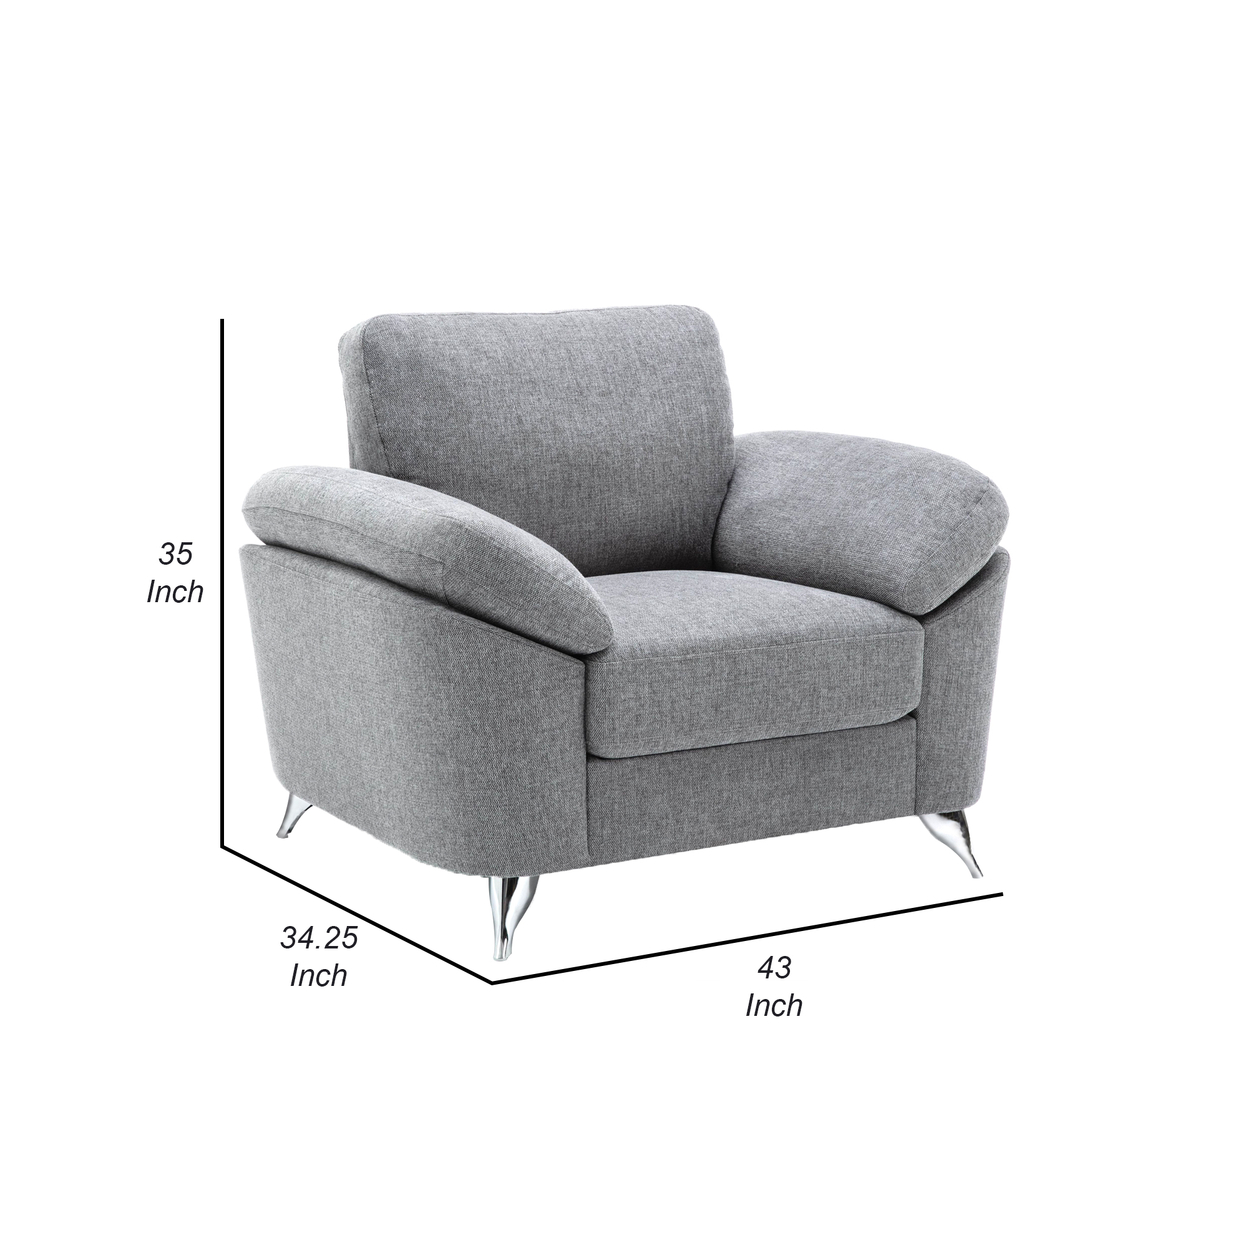 Luis 35 Inch Accent Chair, Gray Polyester Fabric, Sloped Pillow Top Arms- Saltoro Sherpi